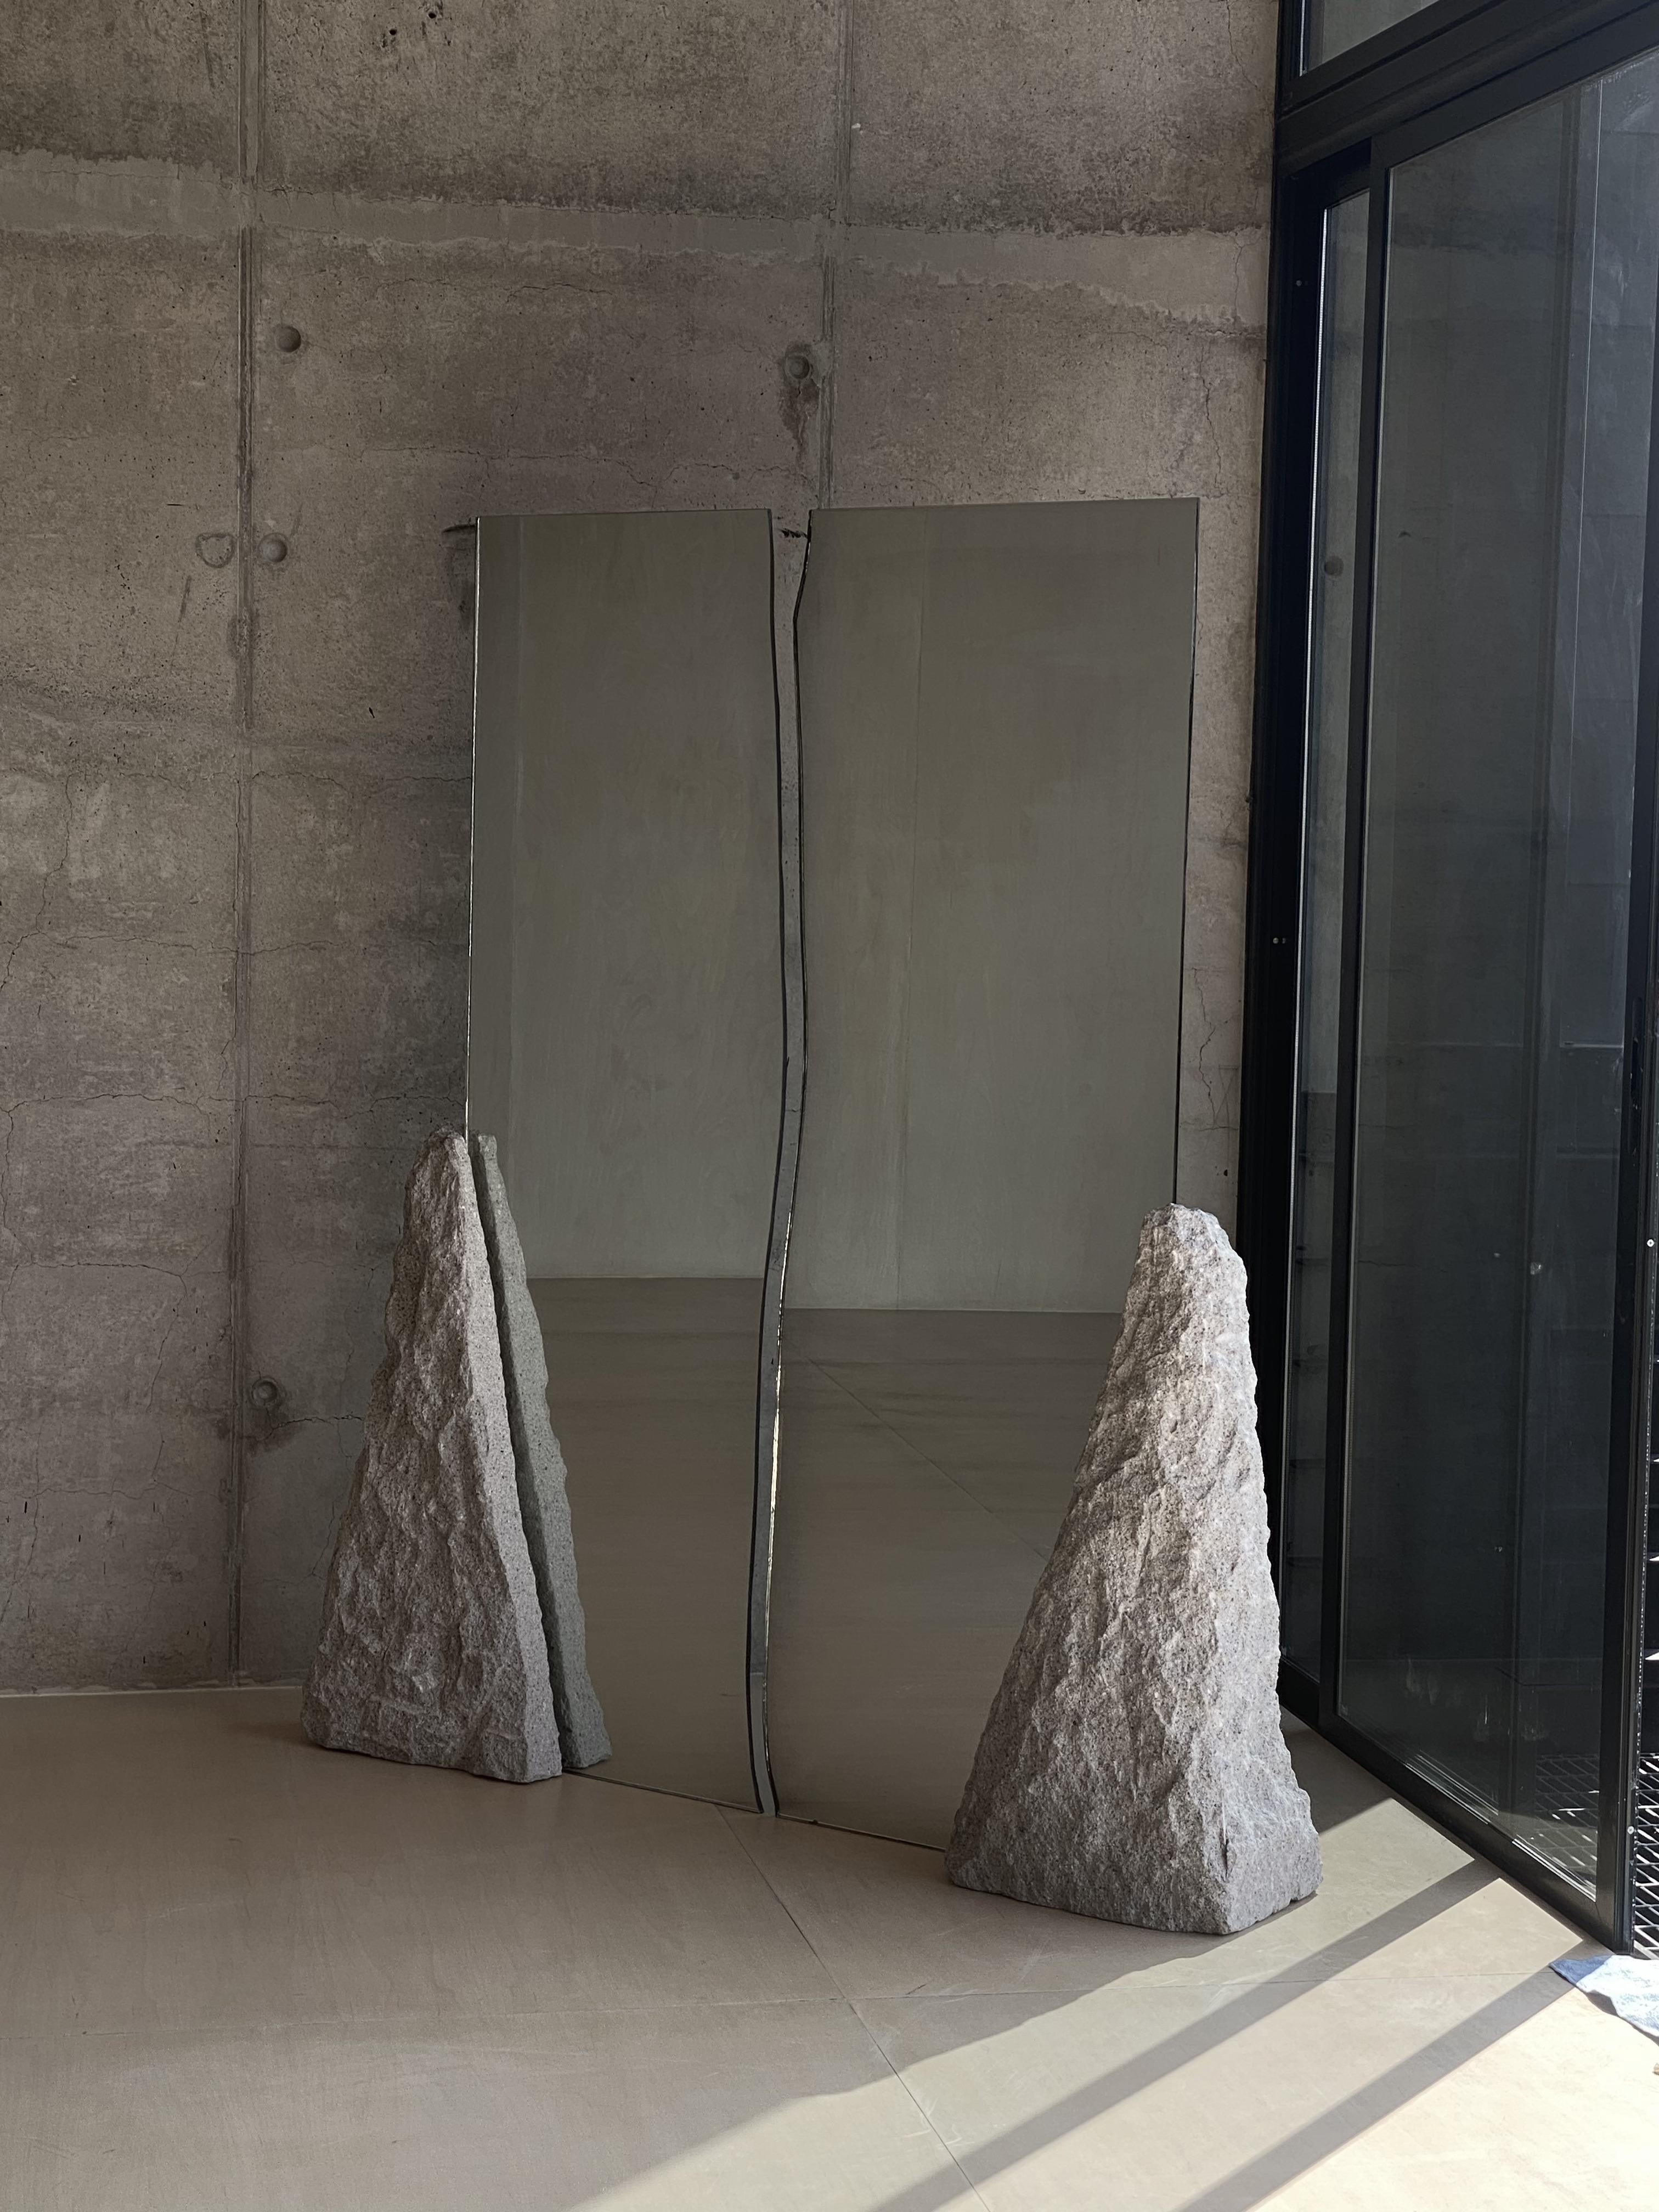 Illusio double mirror by Andres Monnier
One of a Kind.
Dimensions: D 25 x W 80 x H 180 cm
Materials: White Quarry Stone


Andrés Monnier is a Mexican artist born in Guadalajara but based in Ensenada. his purpose is to create sculptural pieces